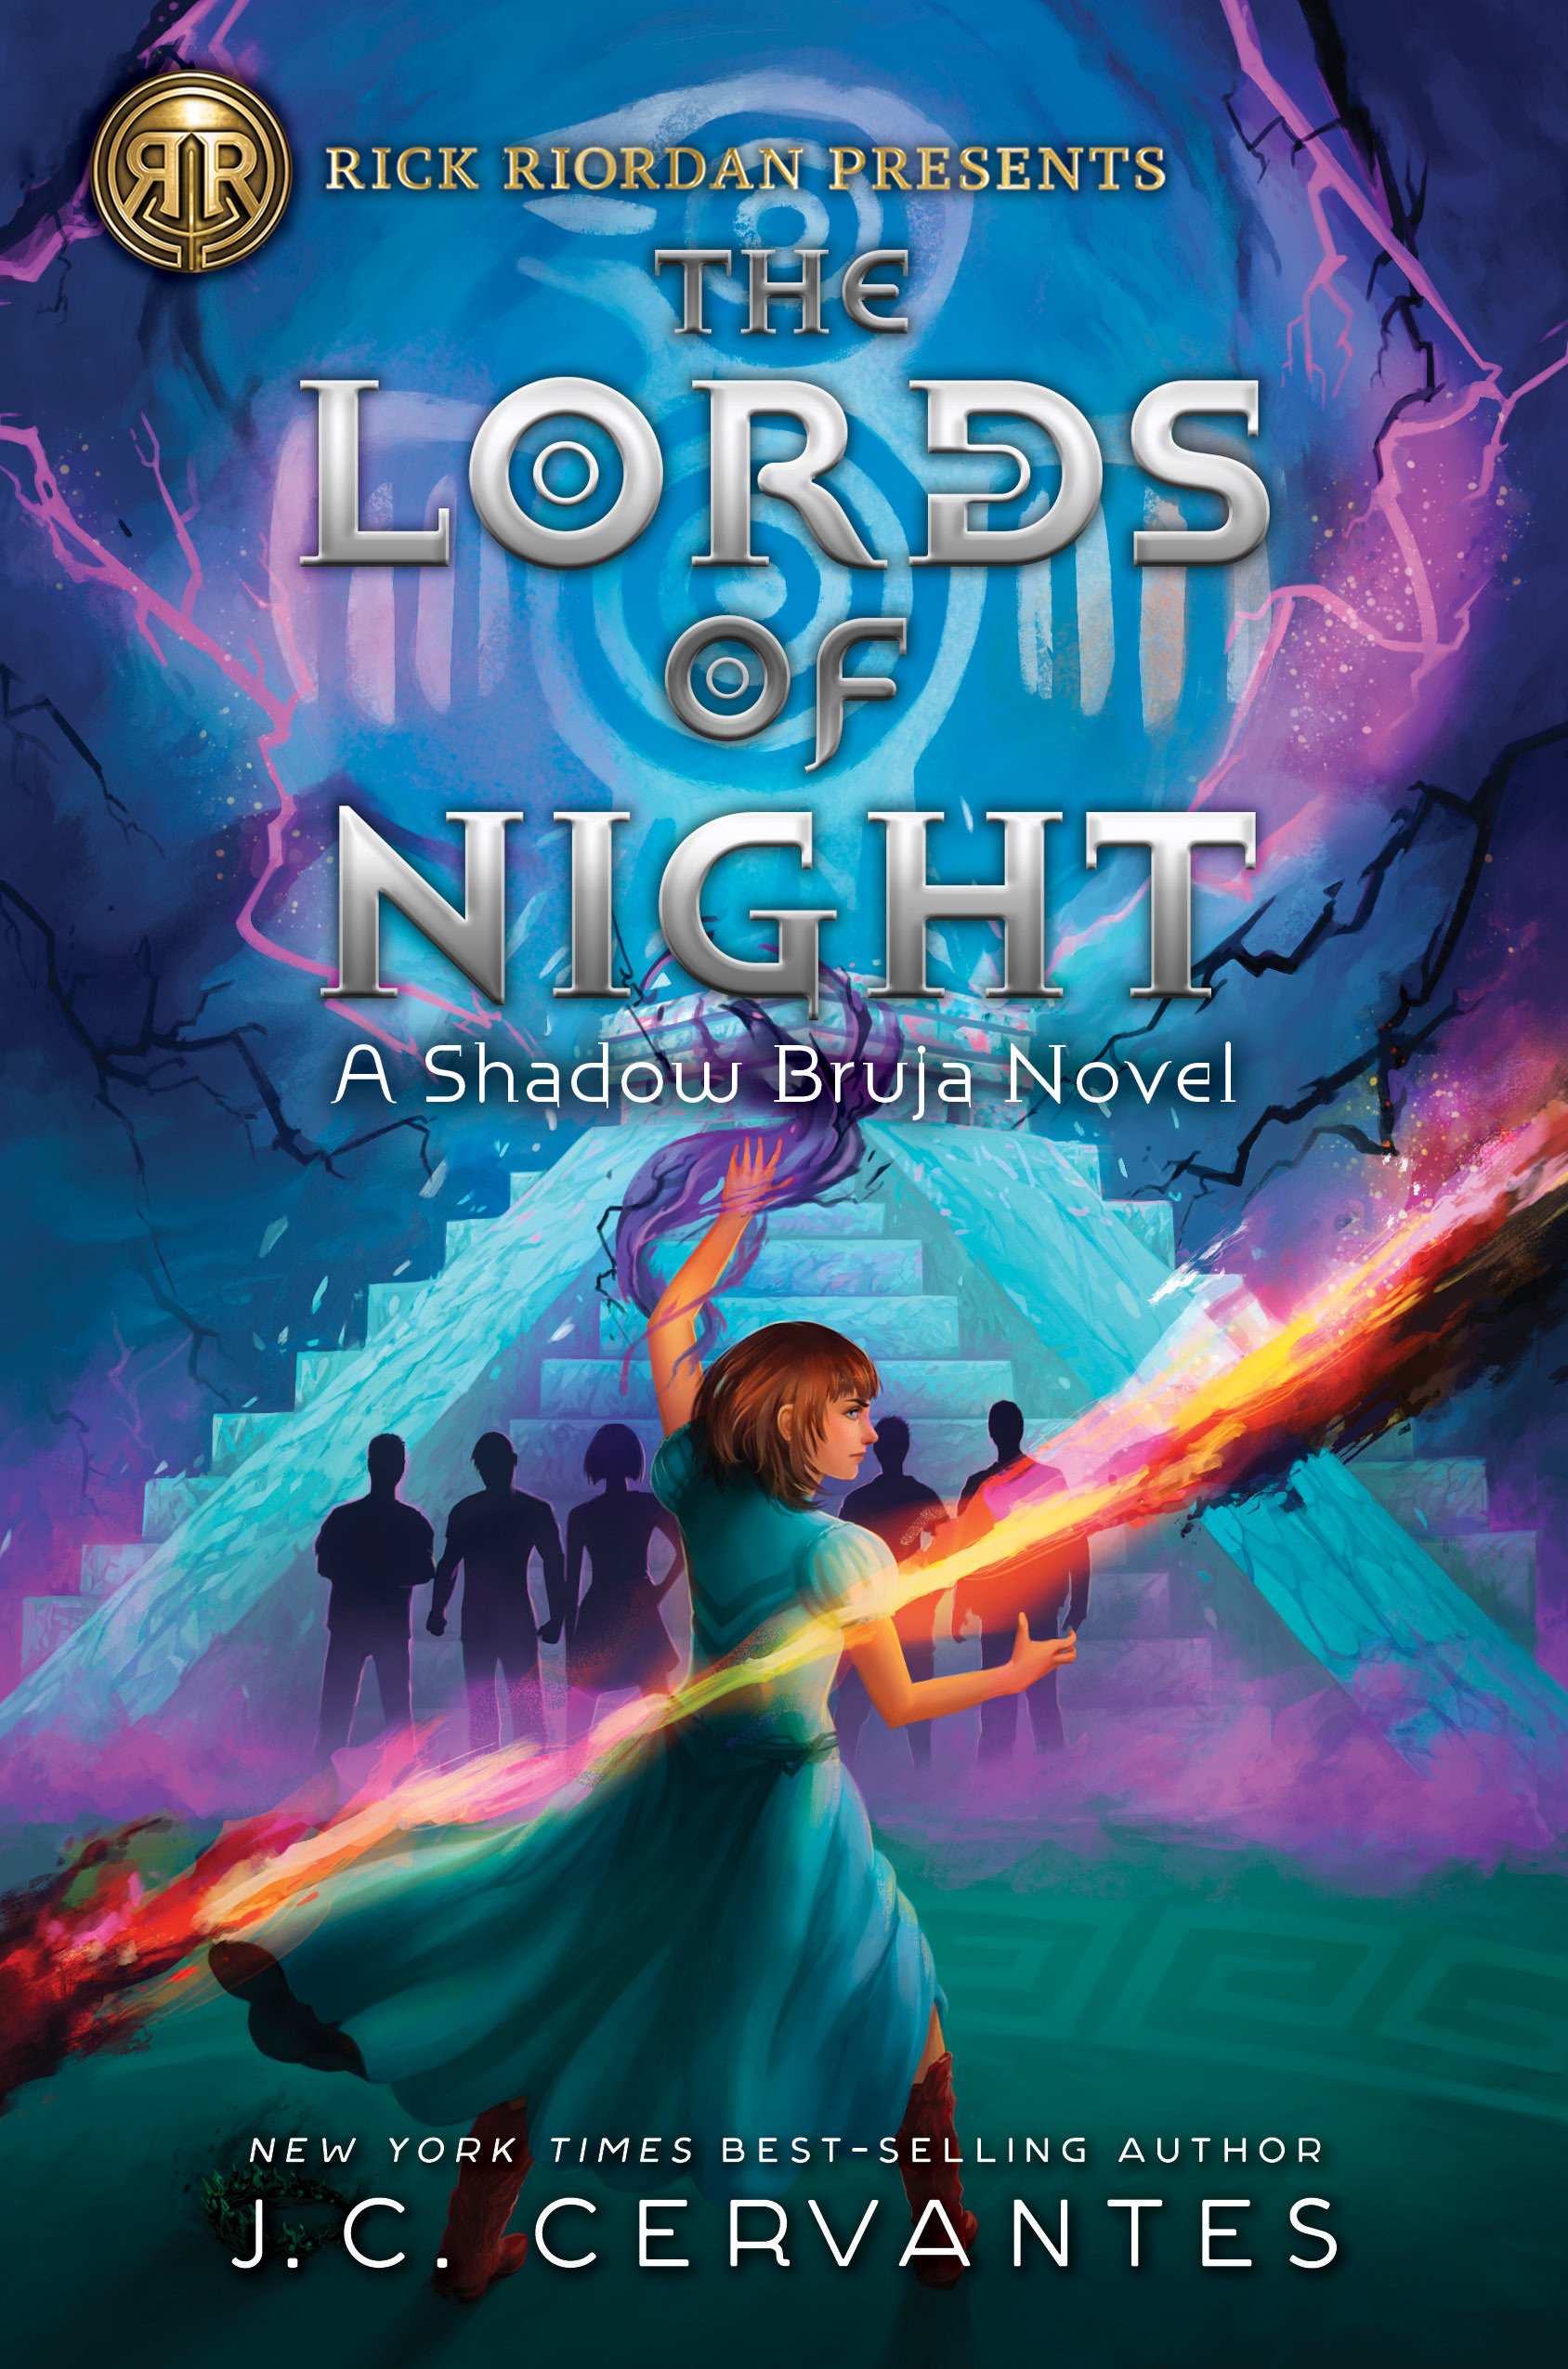 Rick Riordan Presents: Lords Of Night, The-A Shadow Bruja Novel Book 1 (Hardcover Book)